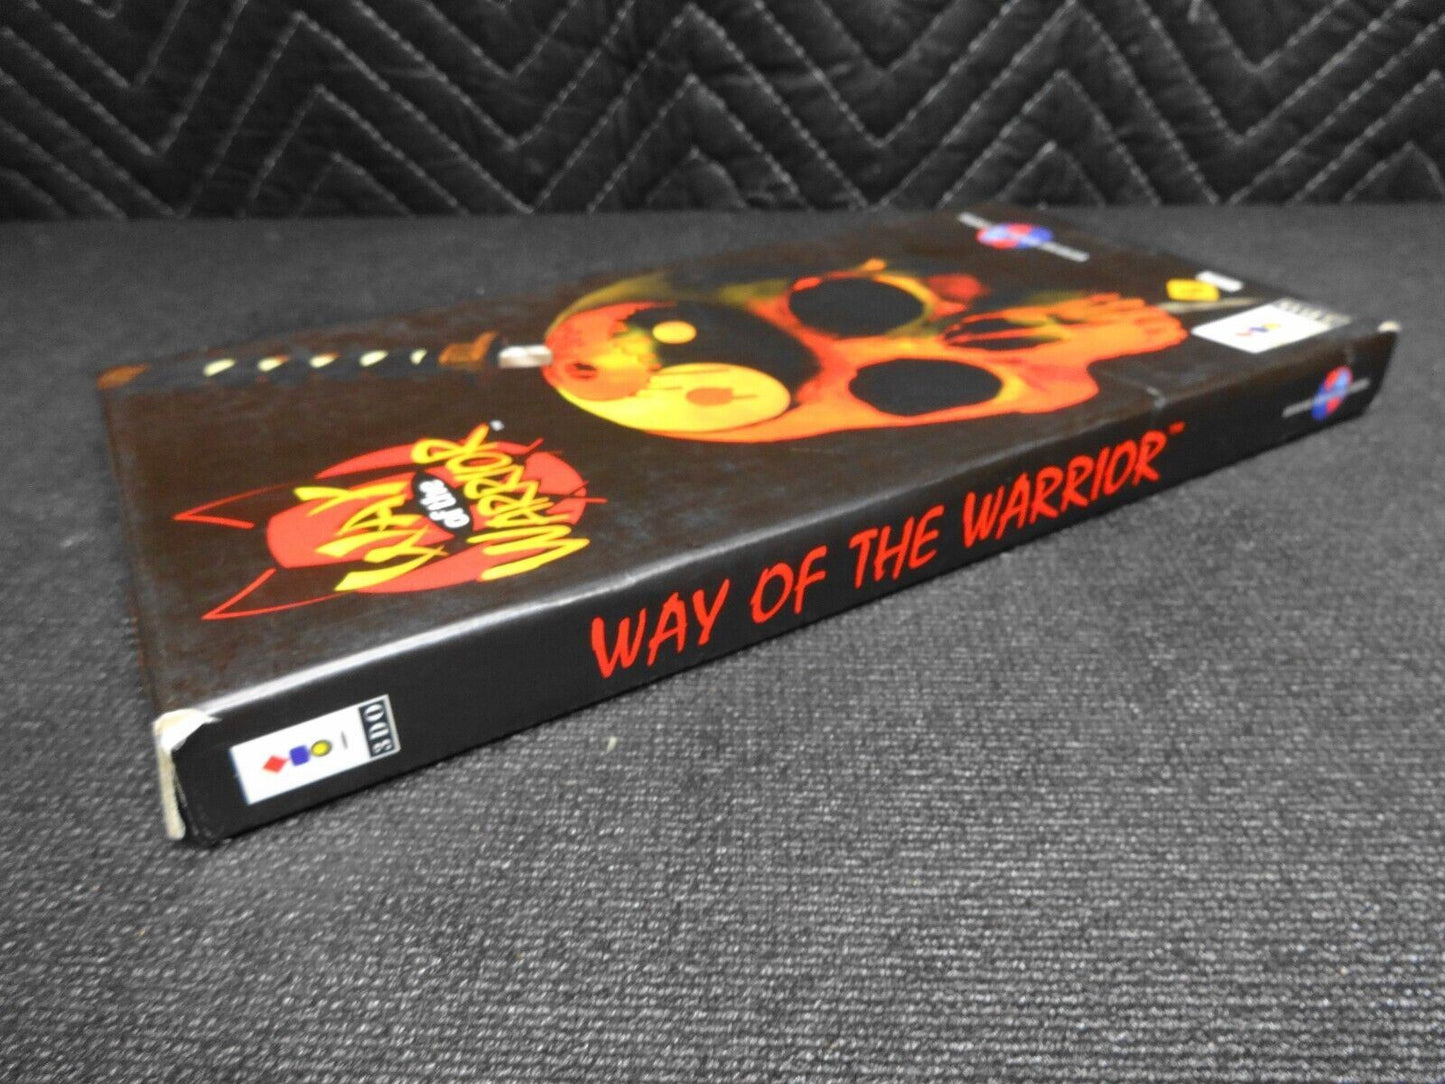 VINTAGE 1994 Way of the Warrior PANASONIC 3DO Complete Game Disc Manual Longbox